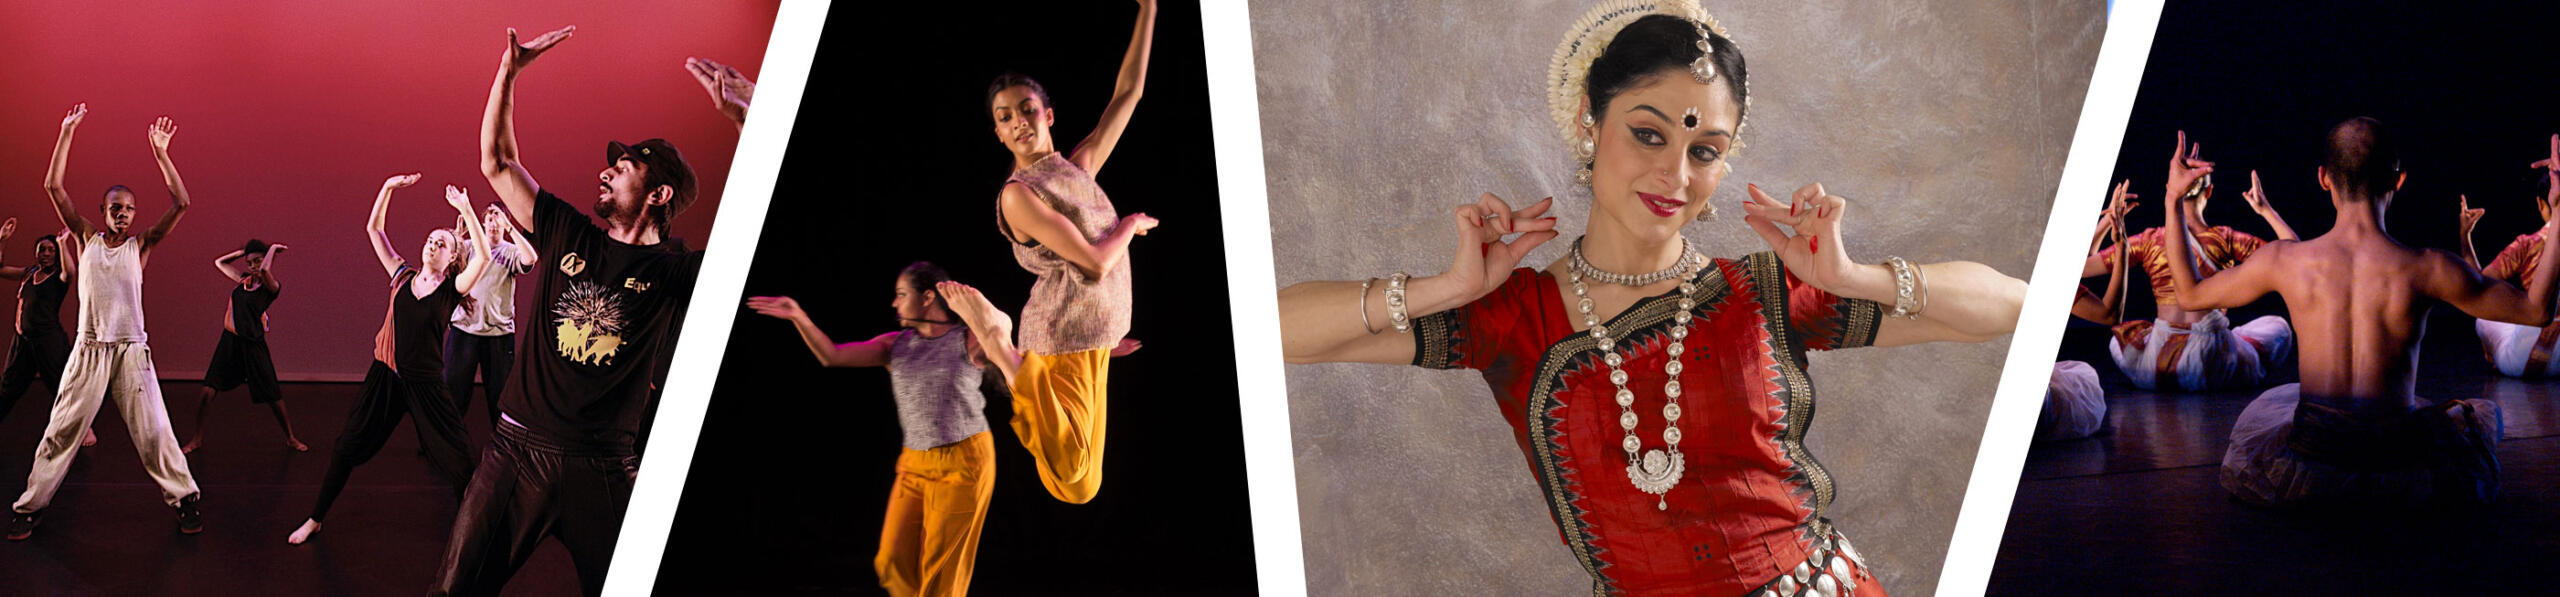 montage of images of different forms of South Asian dance